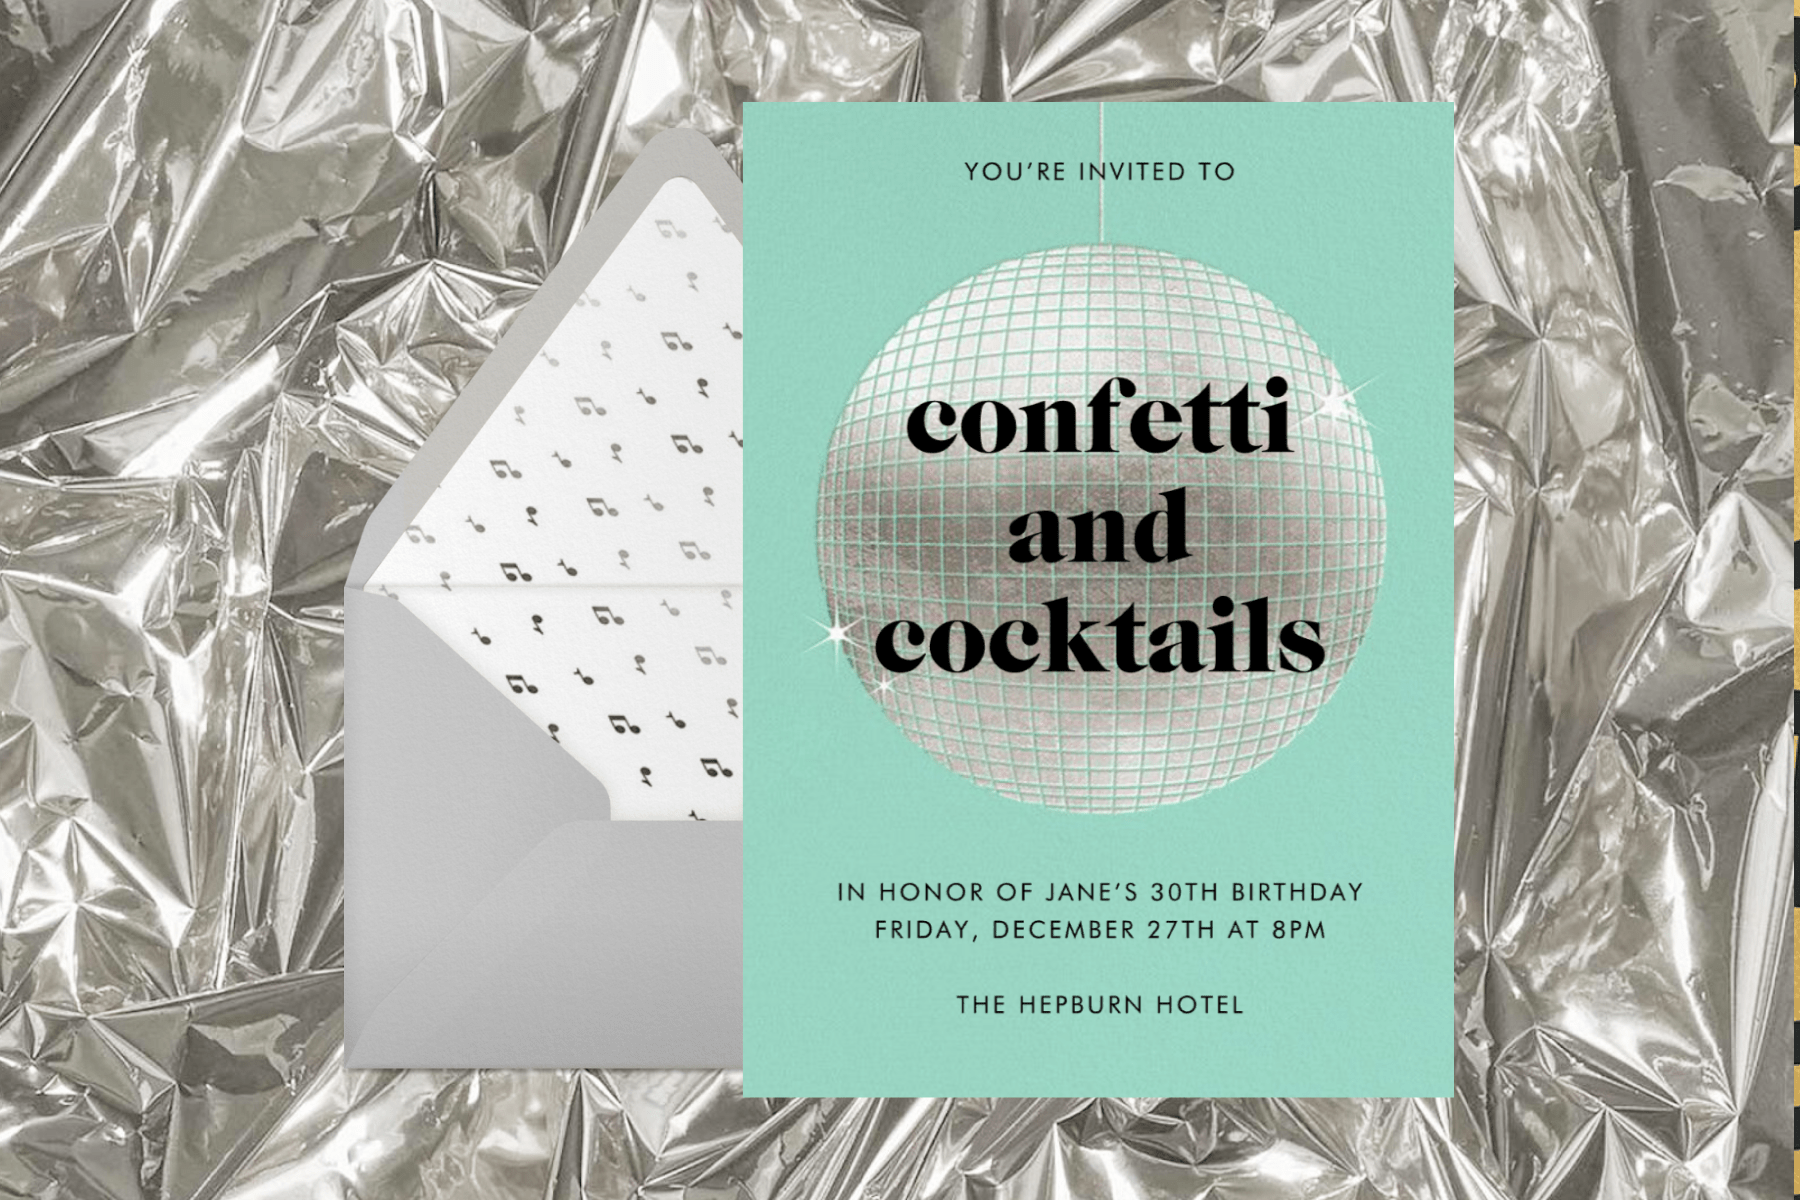 A 30th birthday invitation with a disco ball reading ‘CONFETTI AND COCKTAILS’ over a textured silver background.